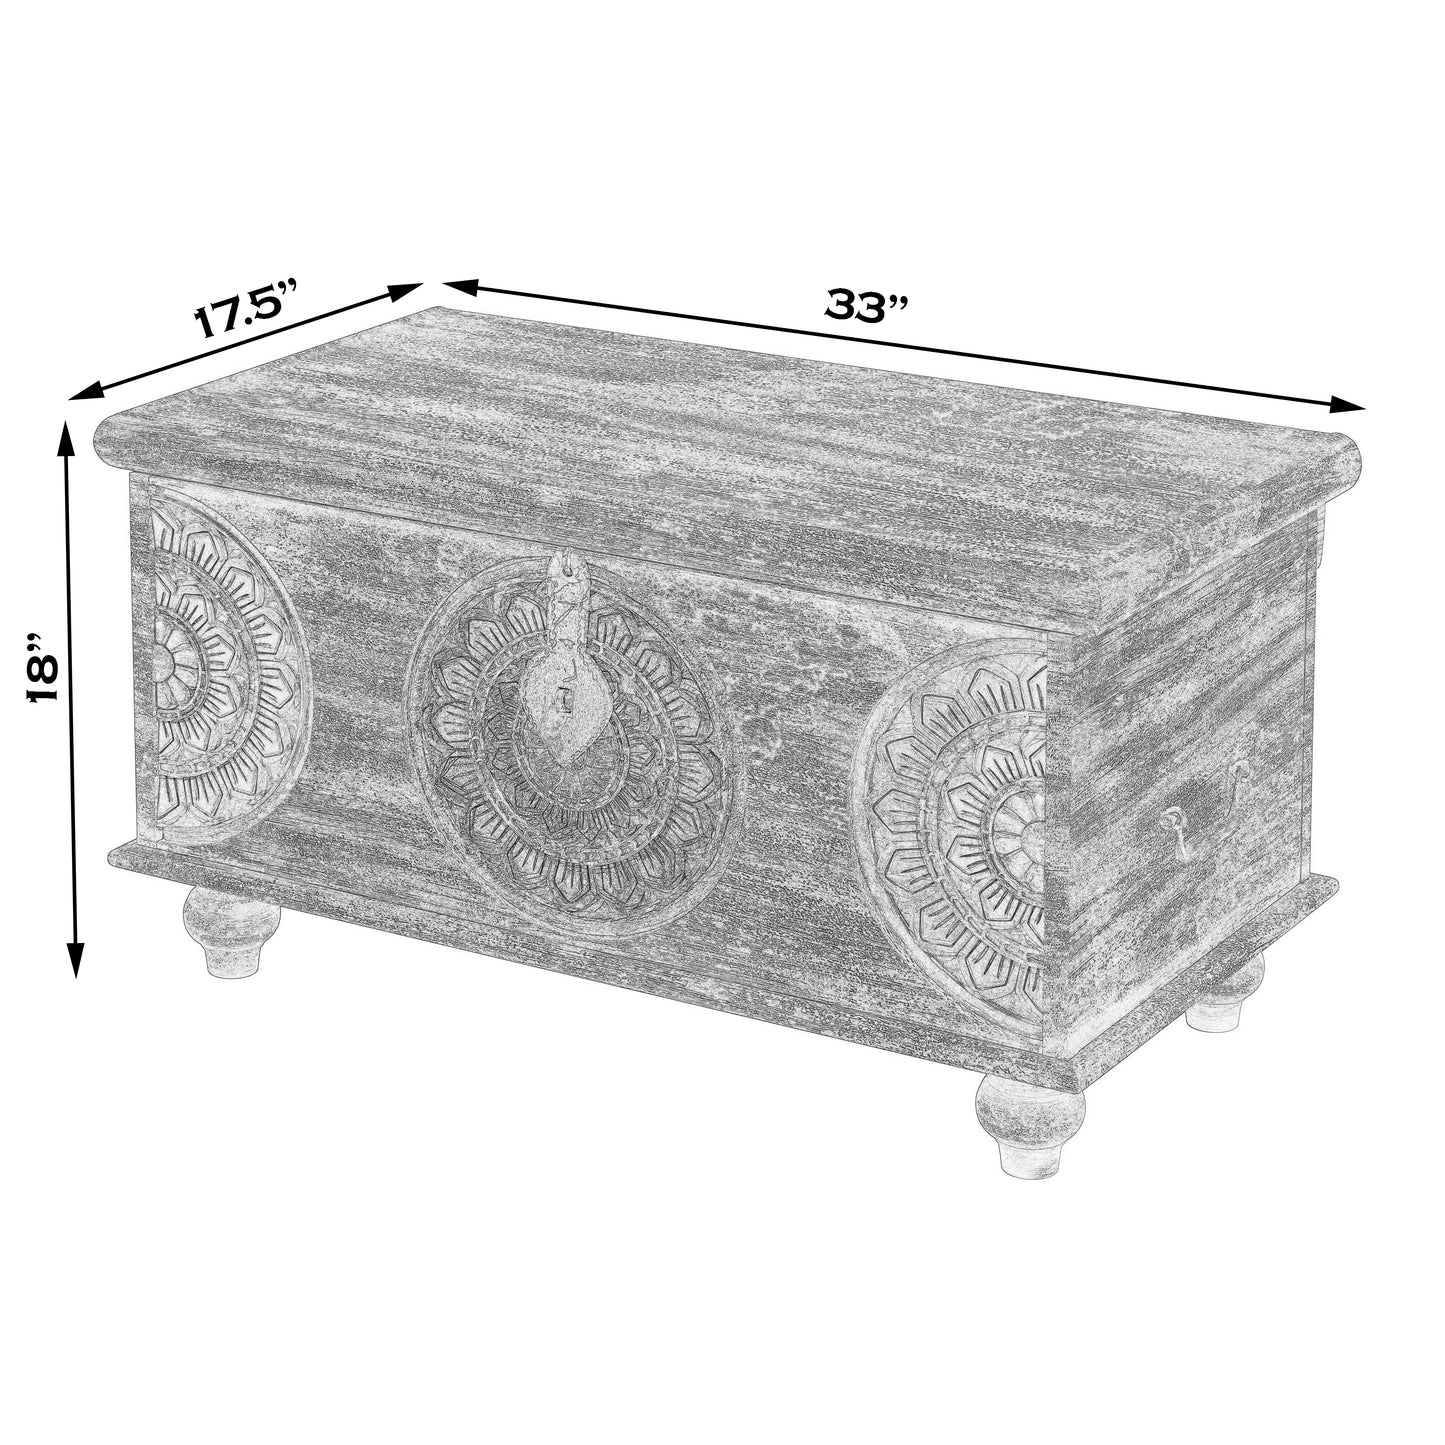 Mesa Carved Wood Trunk Coffee Table in Assorted  3140290